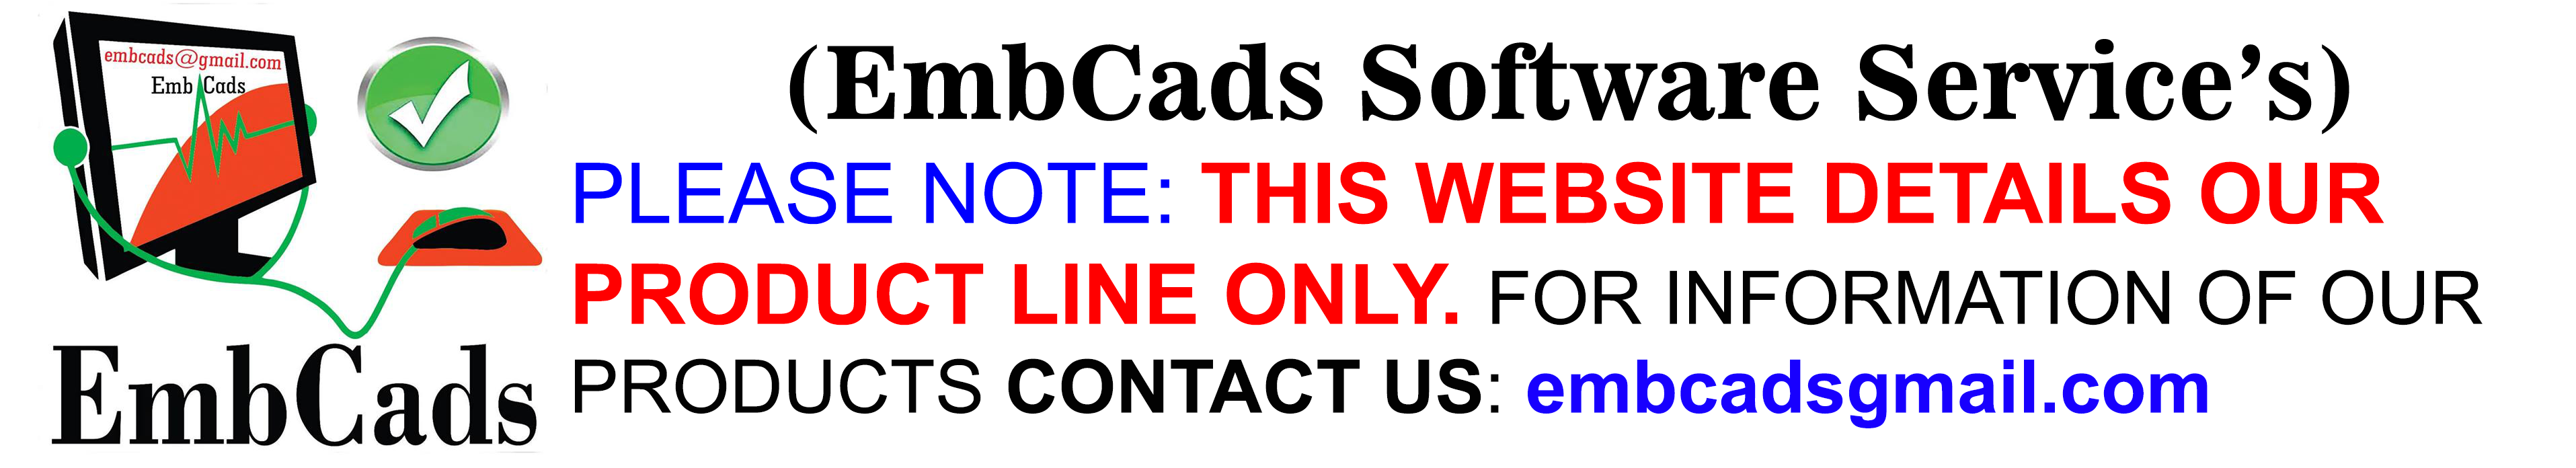 EmbCads Software's Services